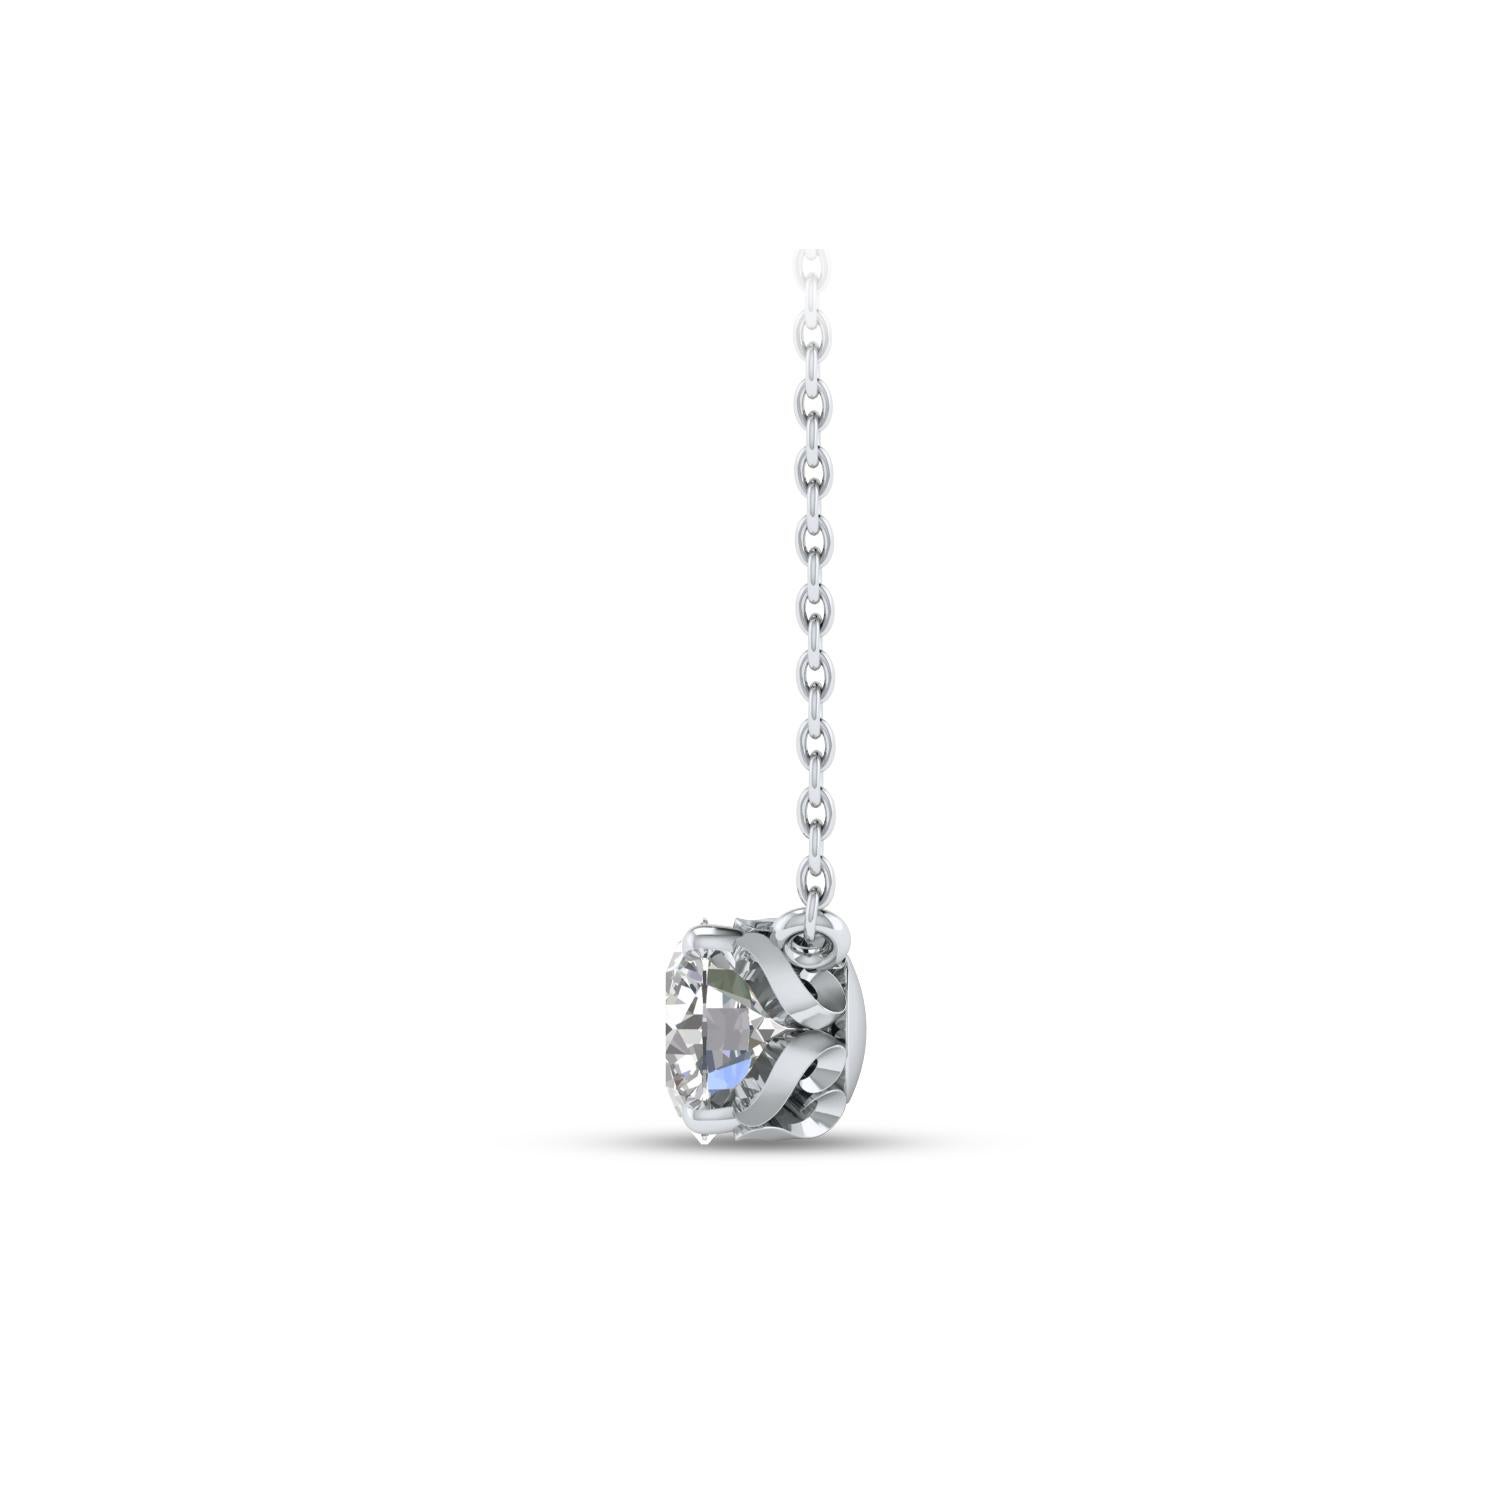  This solitaire diamond necklace features a single, brilliant-cut 0.26 carat diamond in prong setting. This elegant necklace includes 20-inch cable chain with extender at 18-inch. This classic necklace will be accompanied with a HARAKH certificate